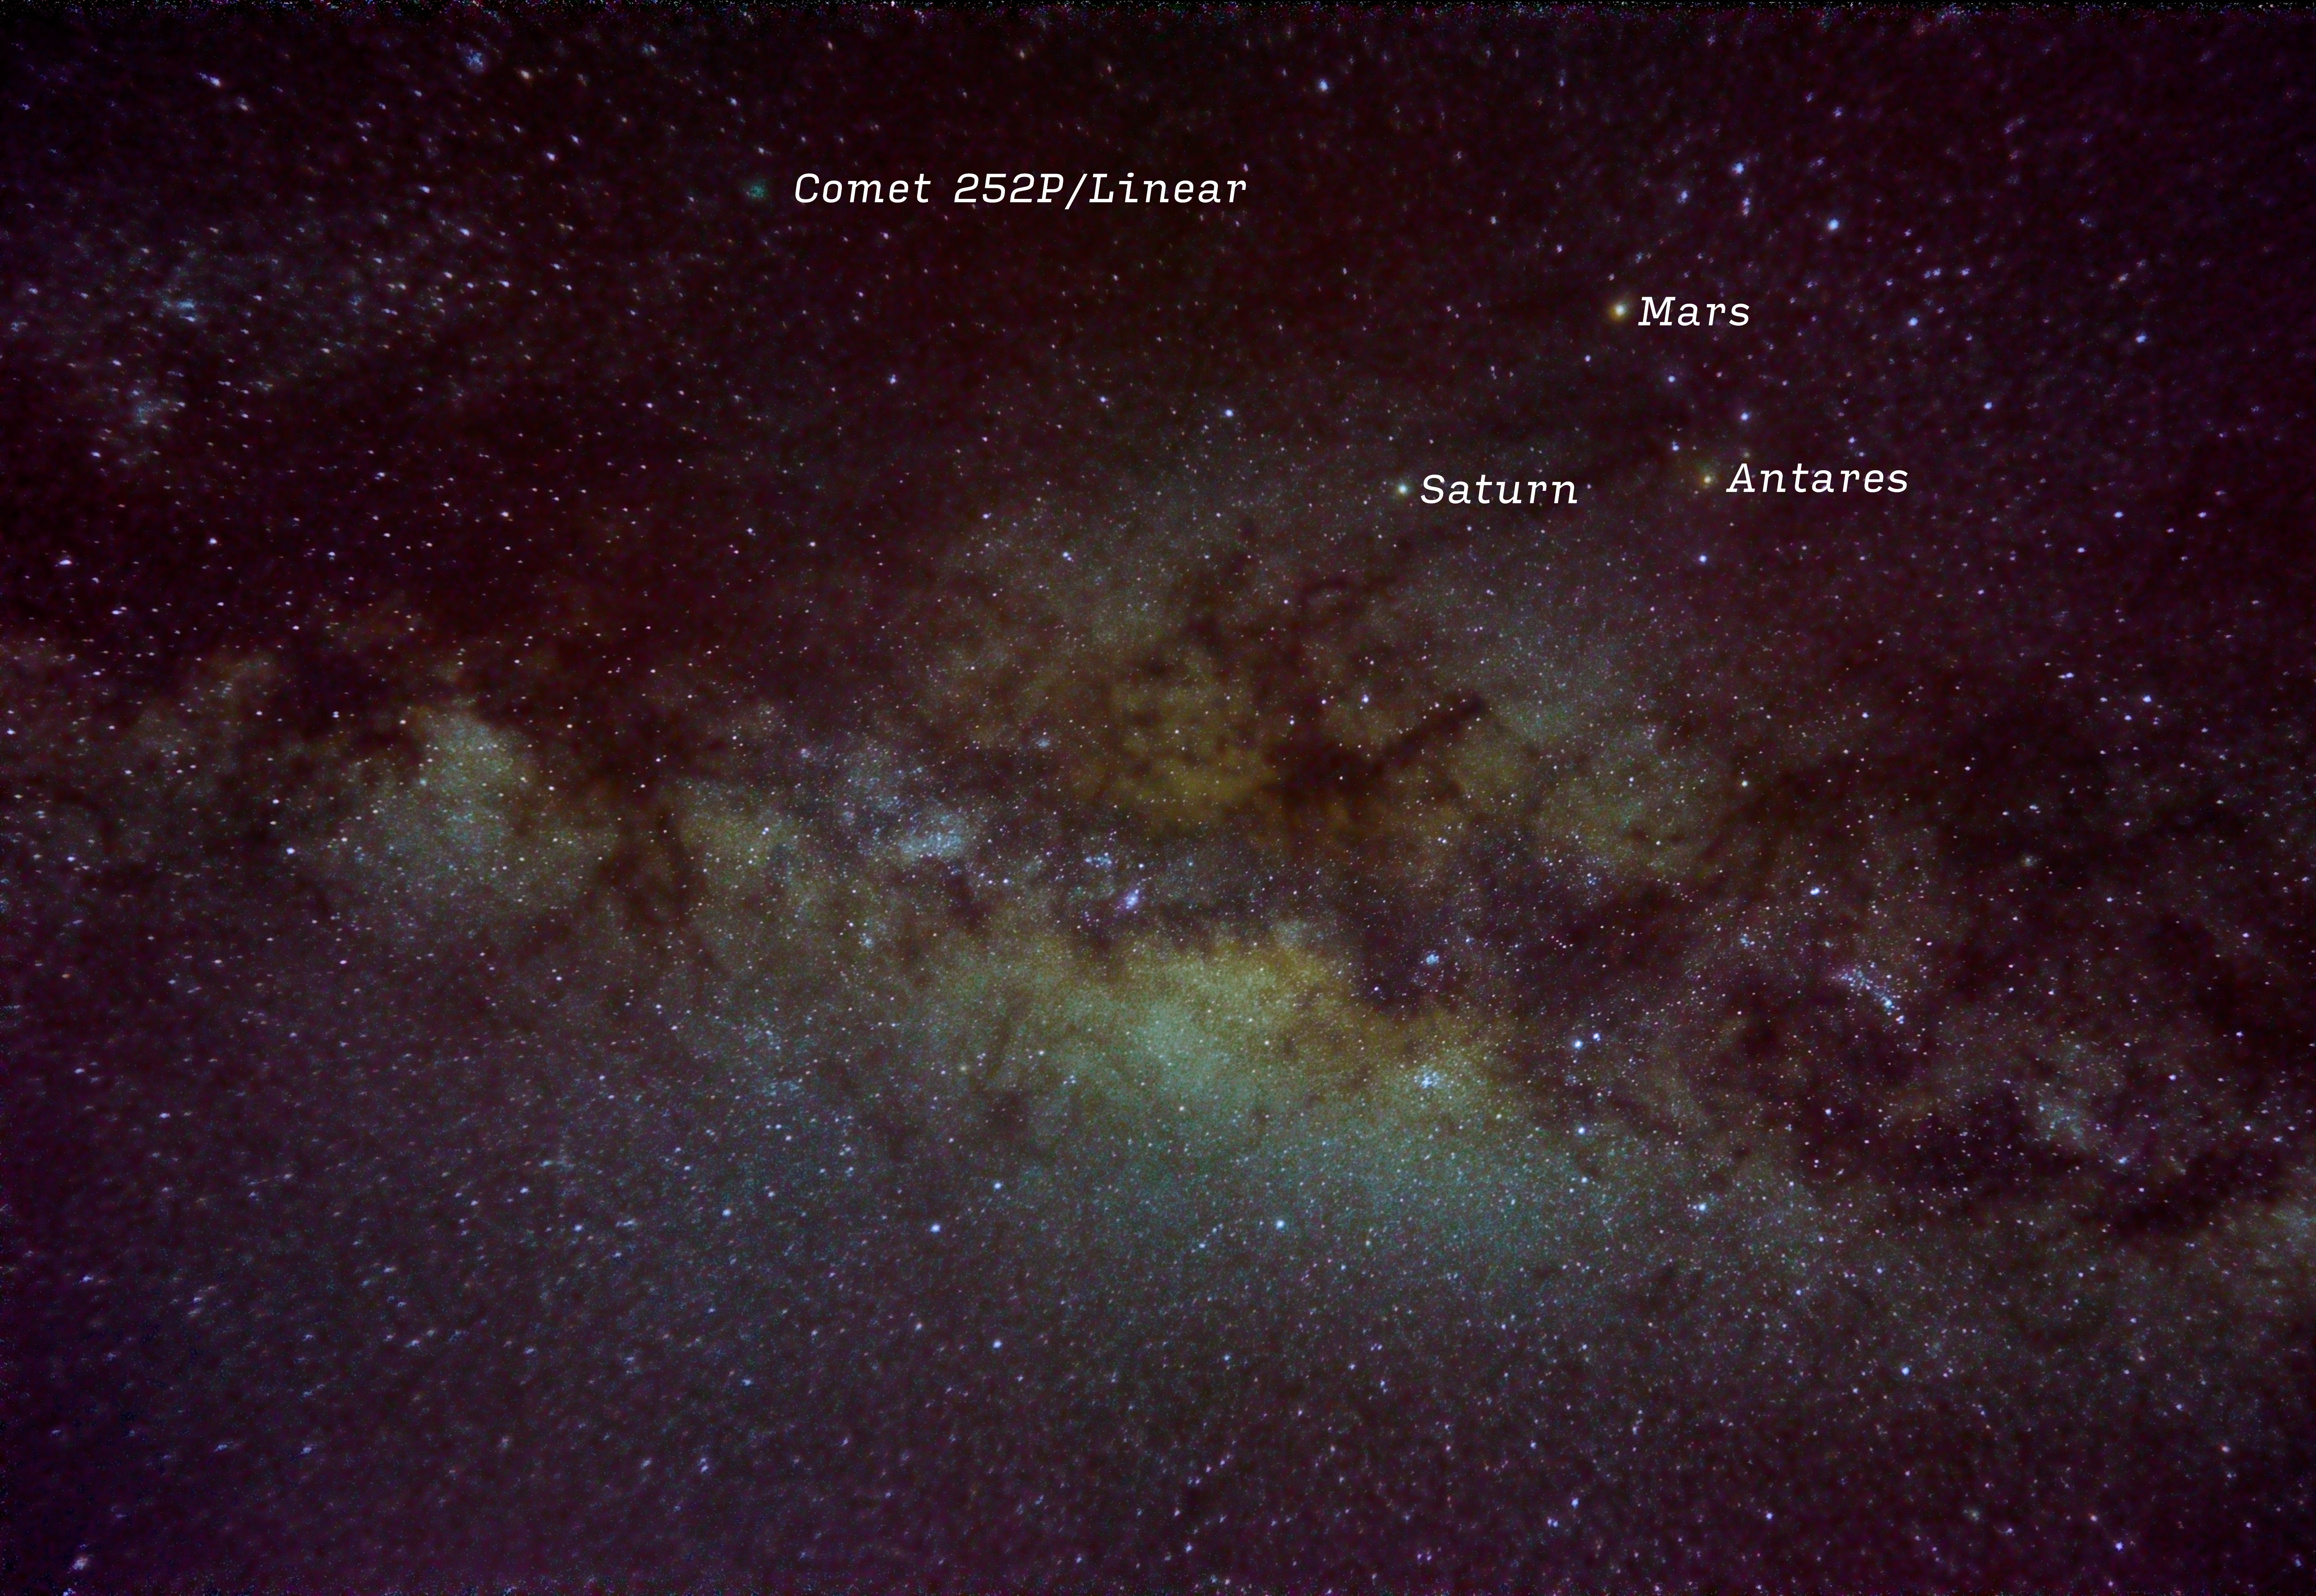 Planets, a Star and a Comet: Four Celestial Bodies Meet in Stunning Skywatching Image